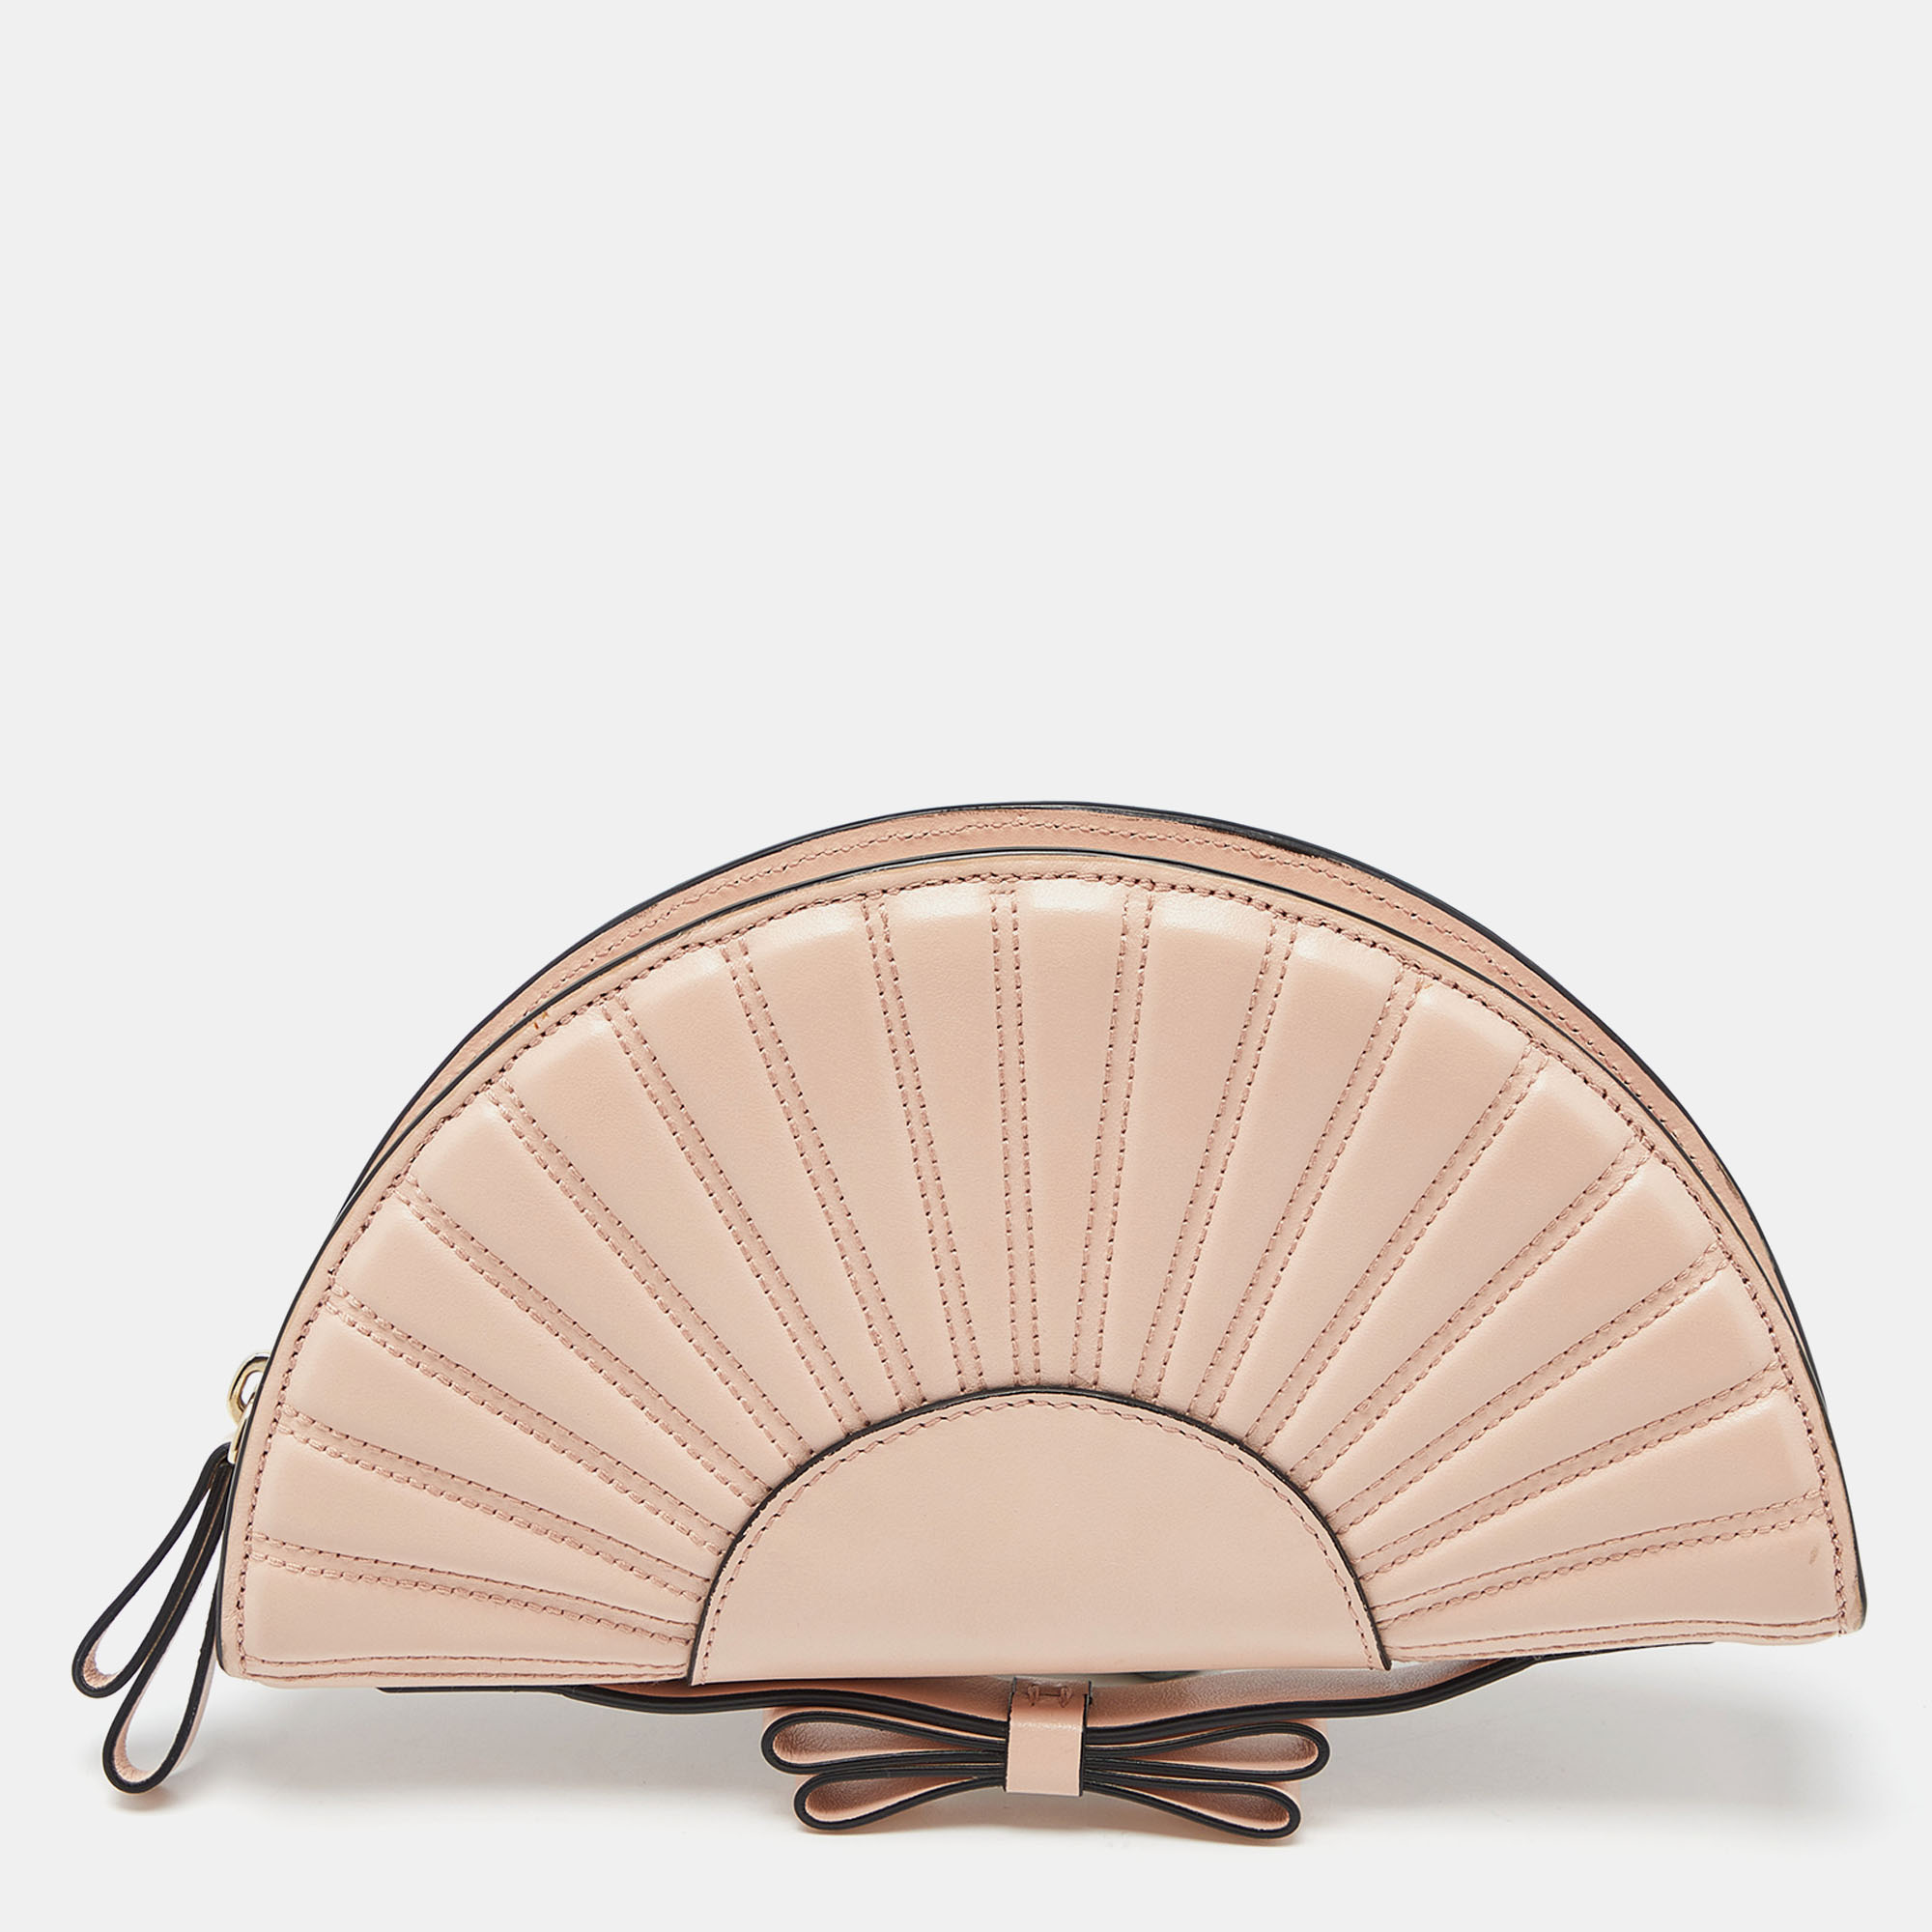 RED Valentino Peach Leather Bow Shell Clutch